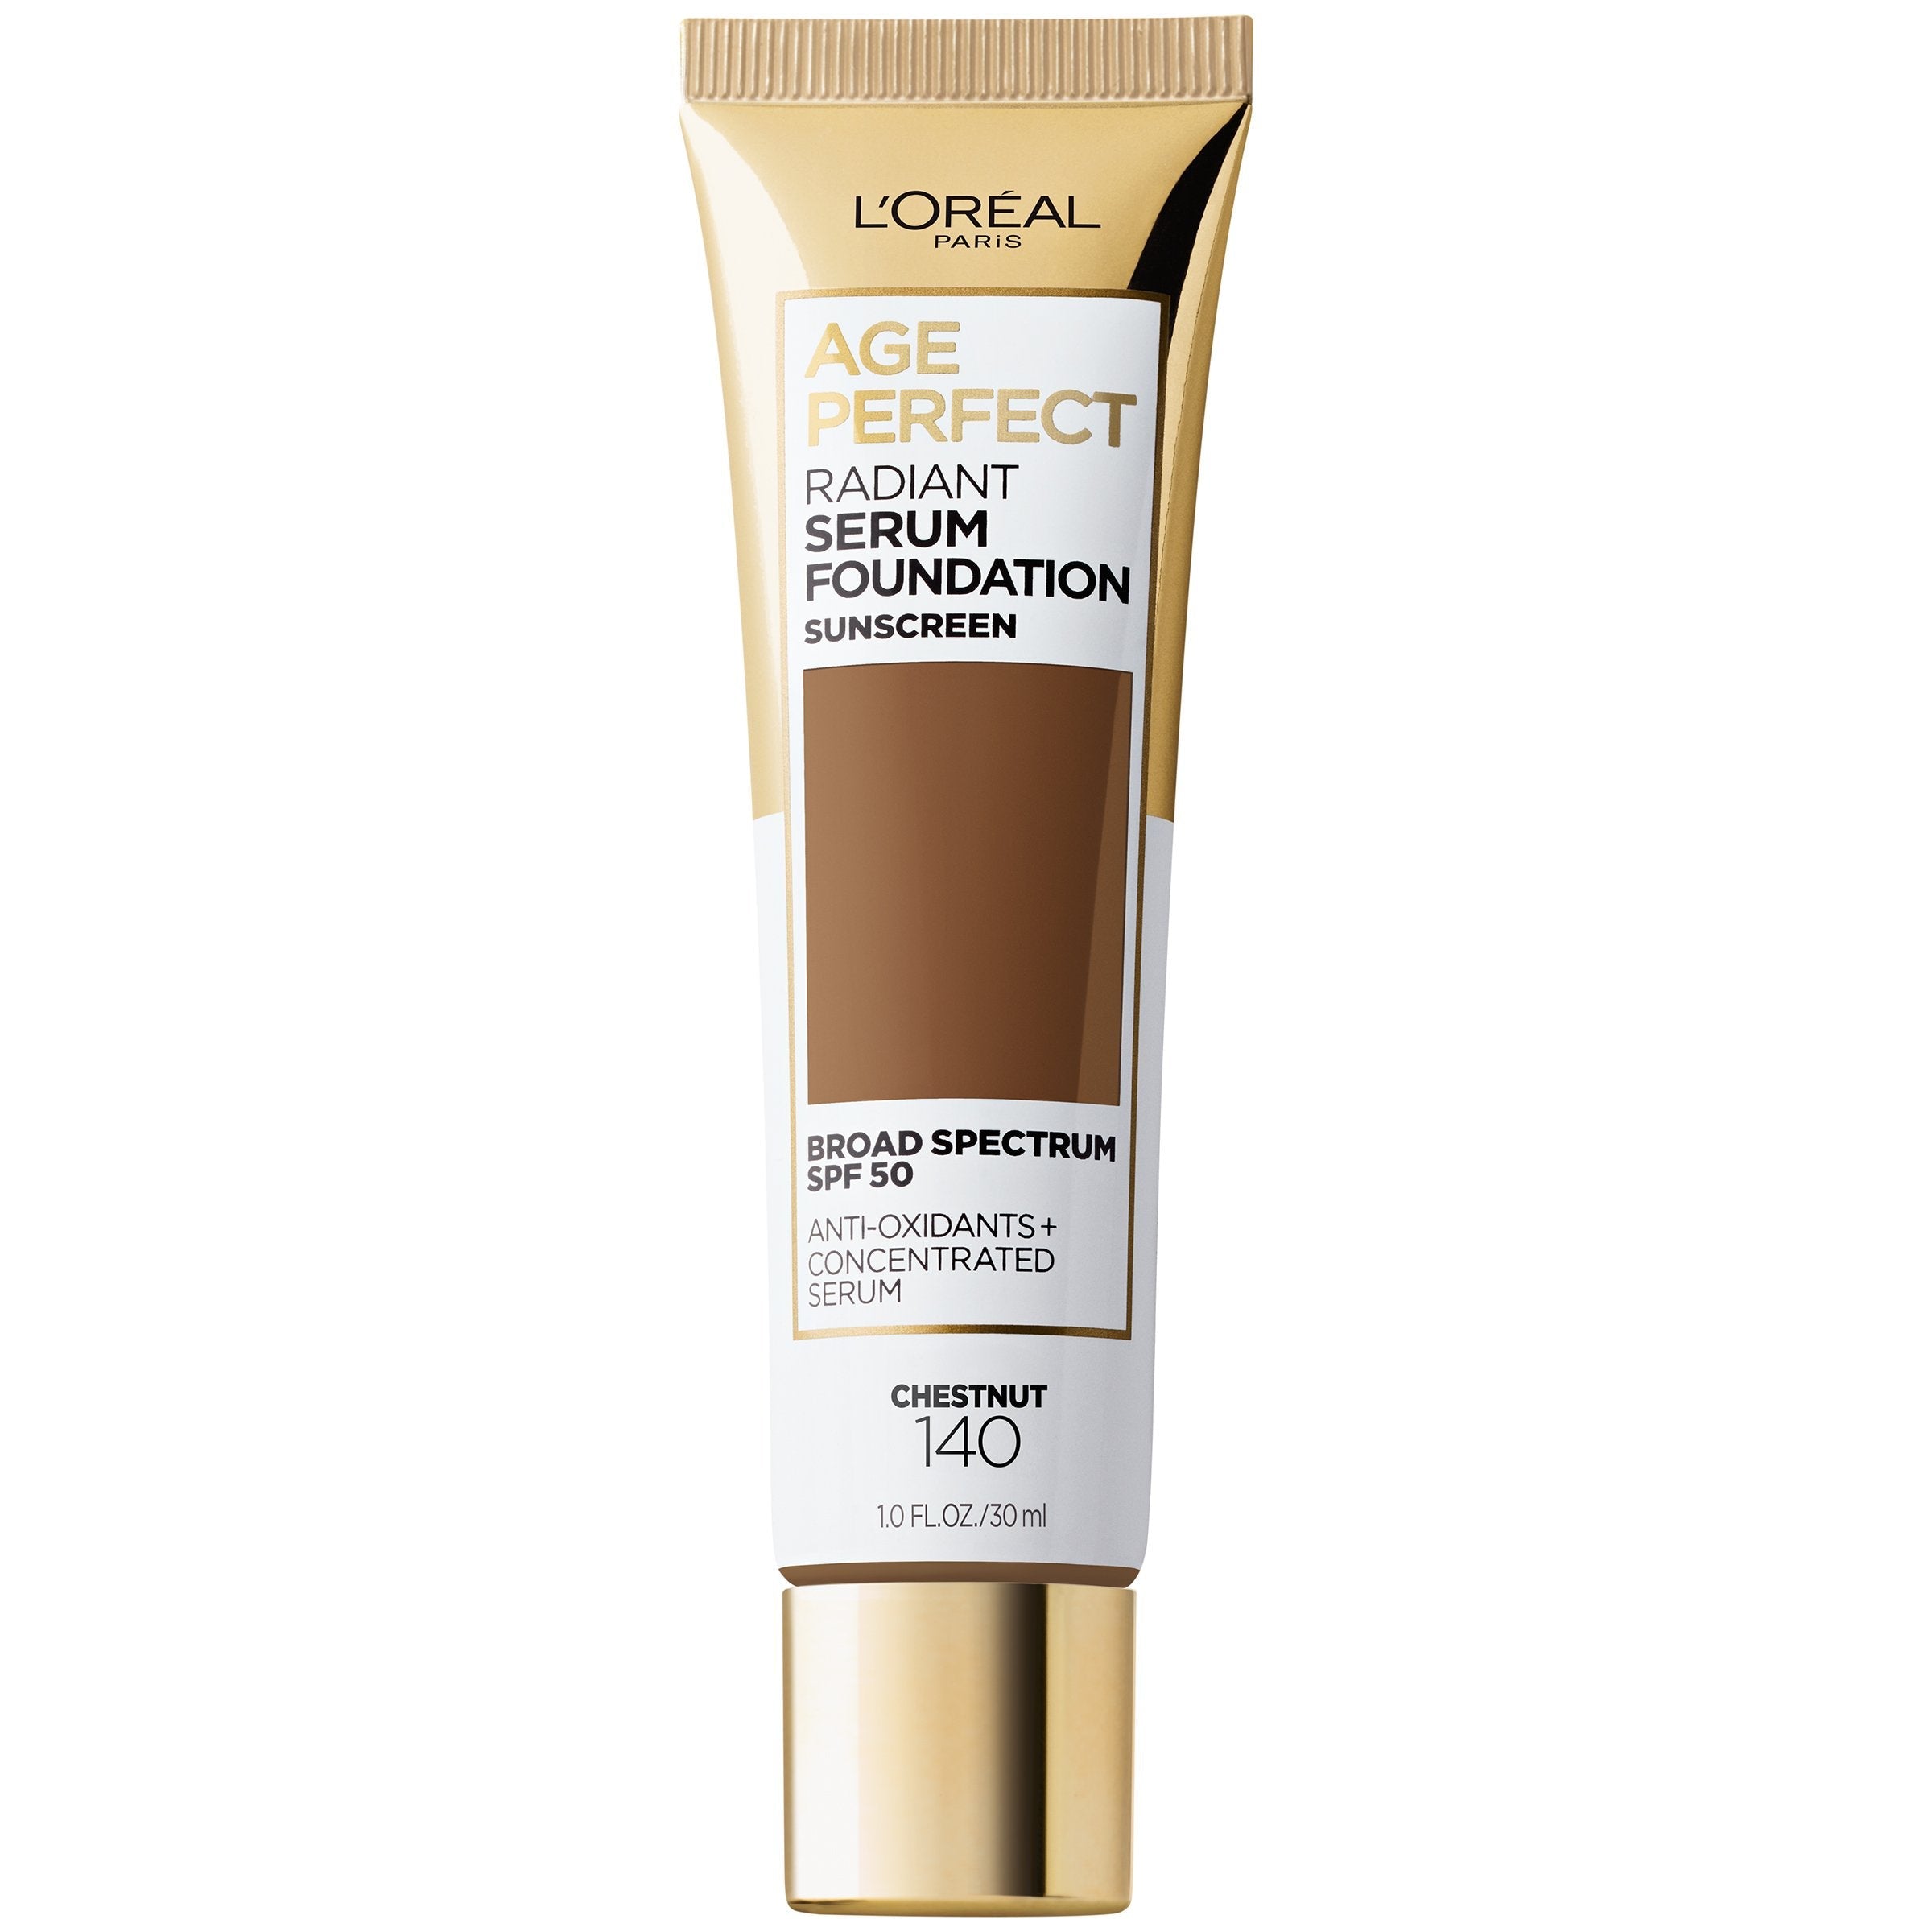 L'Oreal Paris Age Perfect Radiant Serum Foundation with SPF 50, Chestnut, 1